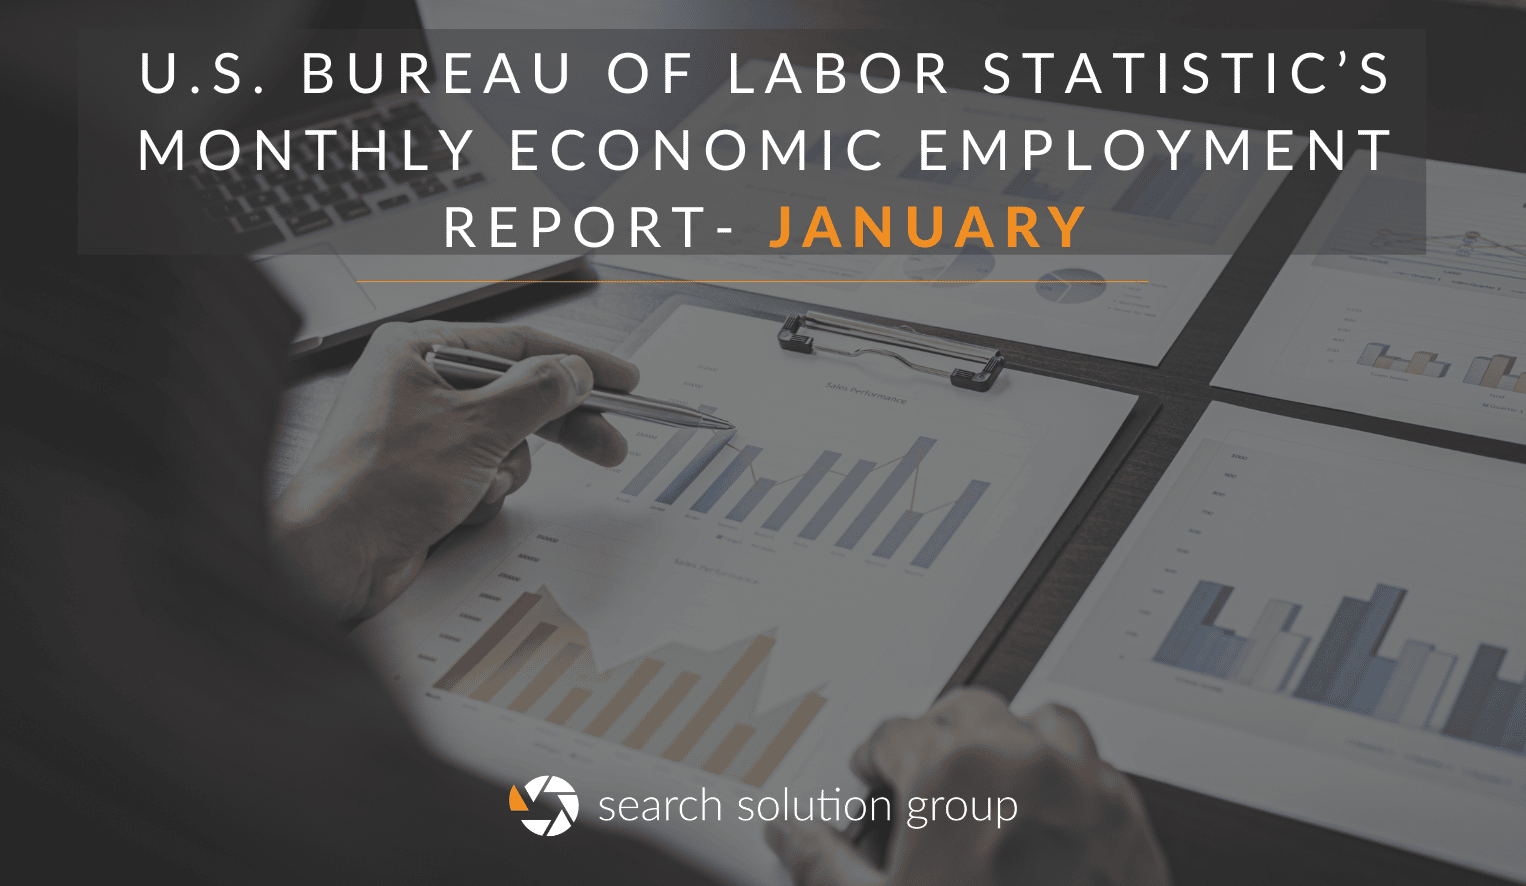 Search Solution Breaks down the U.S. Bureau of Labor Statistic’s Monthly Economic Employment Report for January